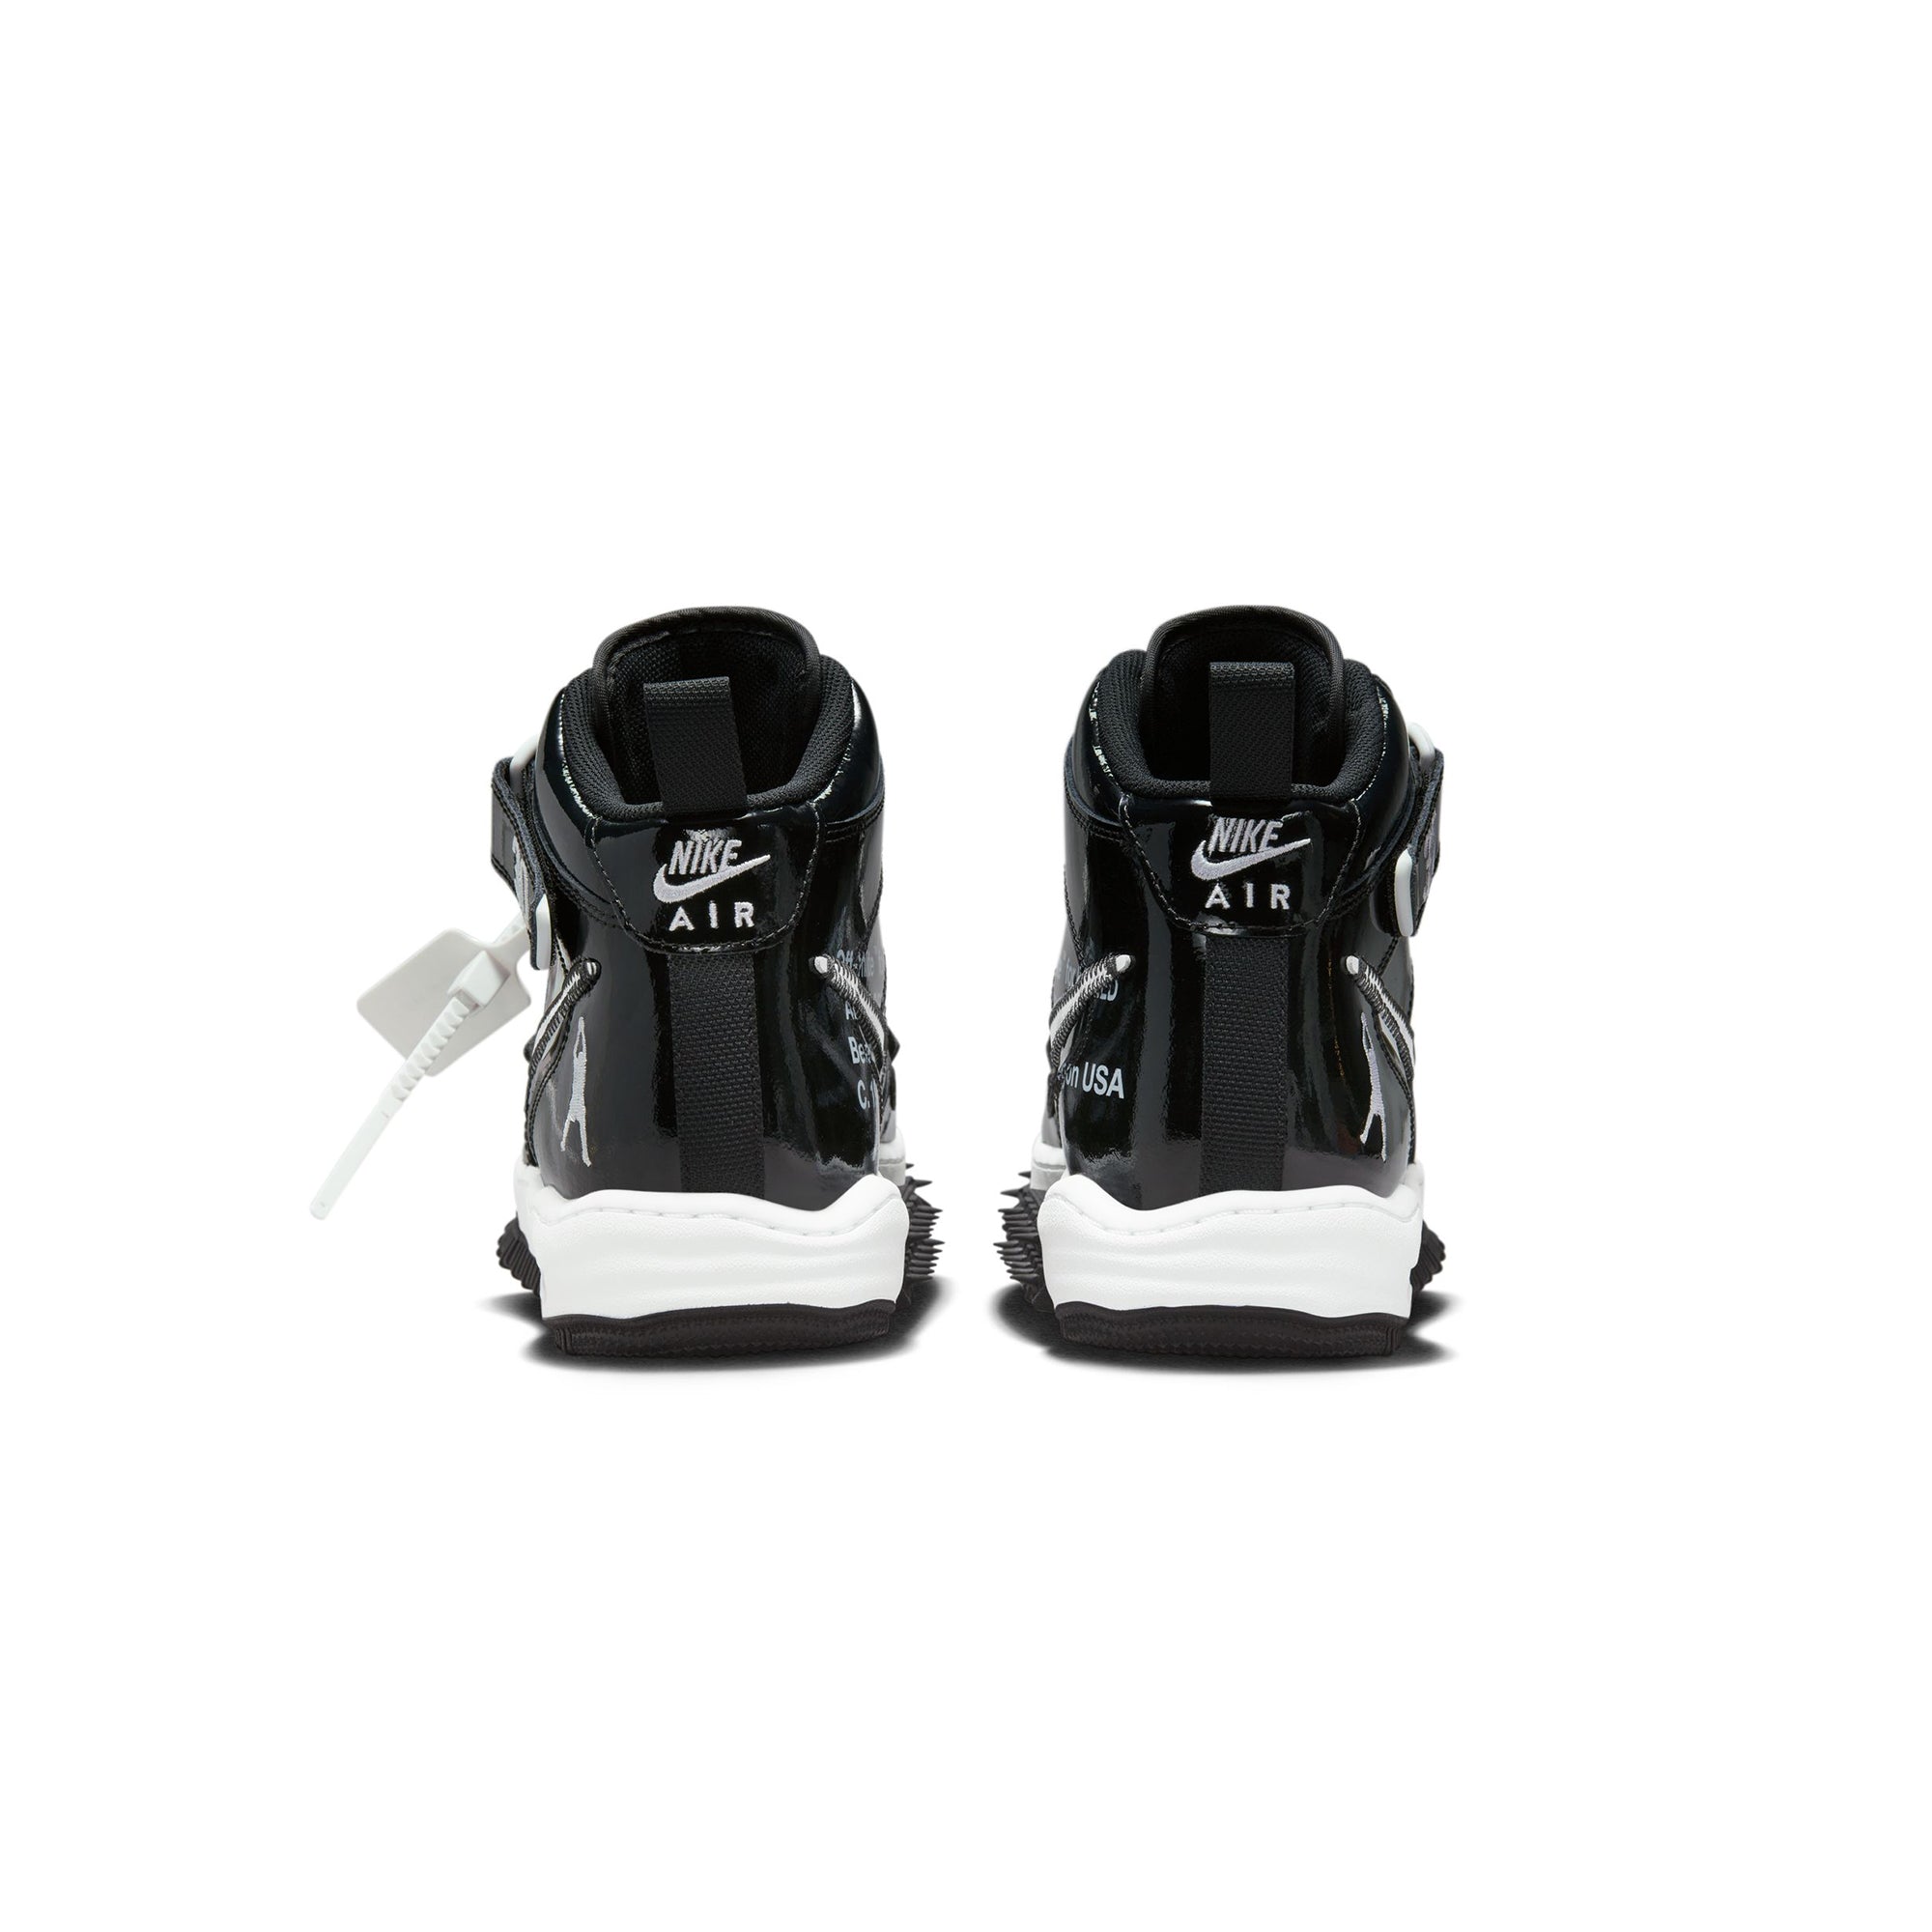 Off-White x Nike Air Force 1 Mid Black DO6290-001 | Size UK 7.5